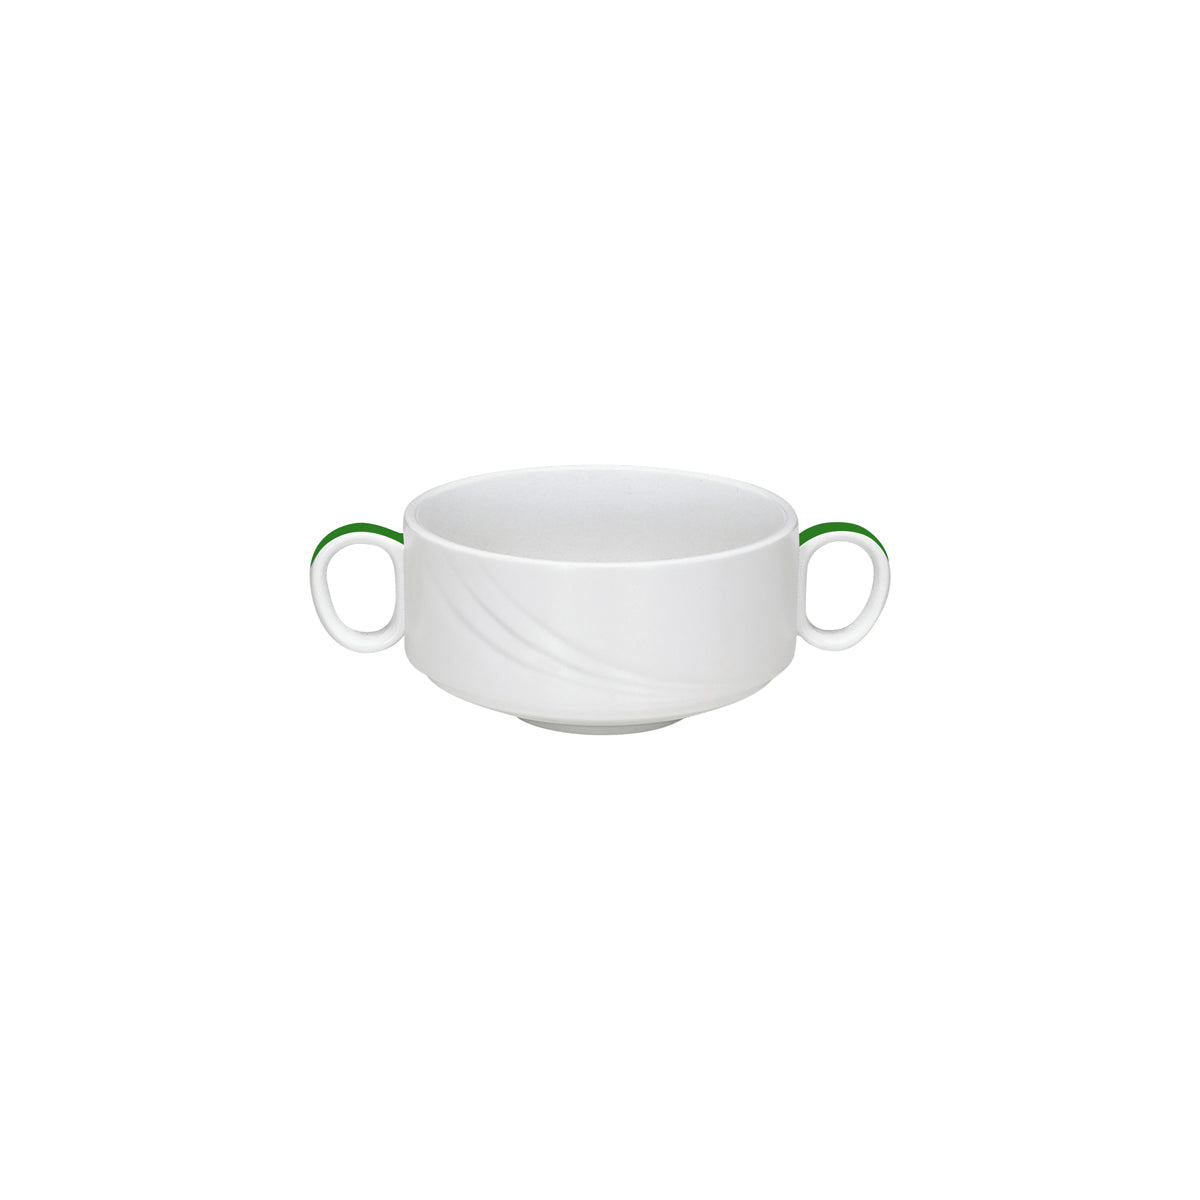 SH9182740/62951 Donna Senior Decor Stackable Soup Cup with 2 Handles with Dark Green Band 108x66mm / 480ml Tomkin Australia Hospitality Supplies